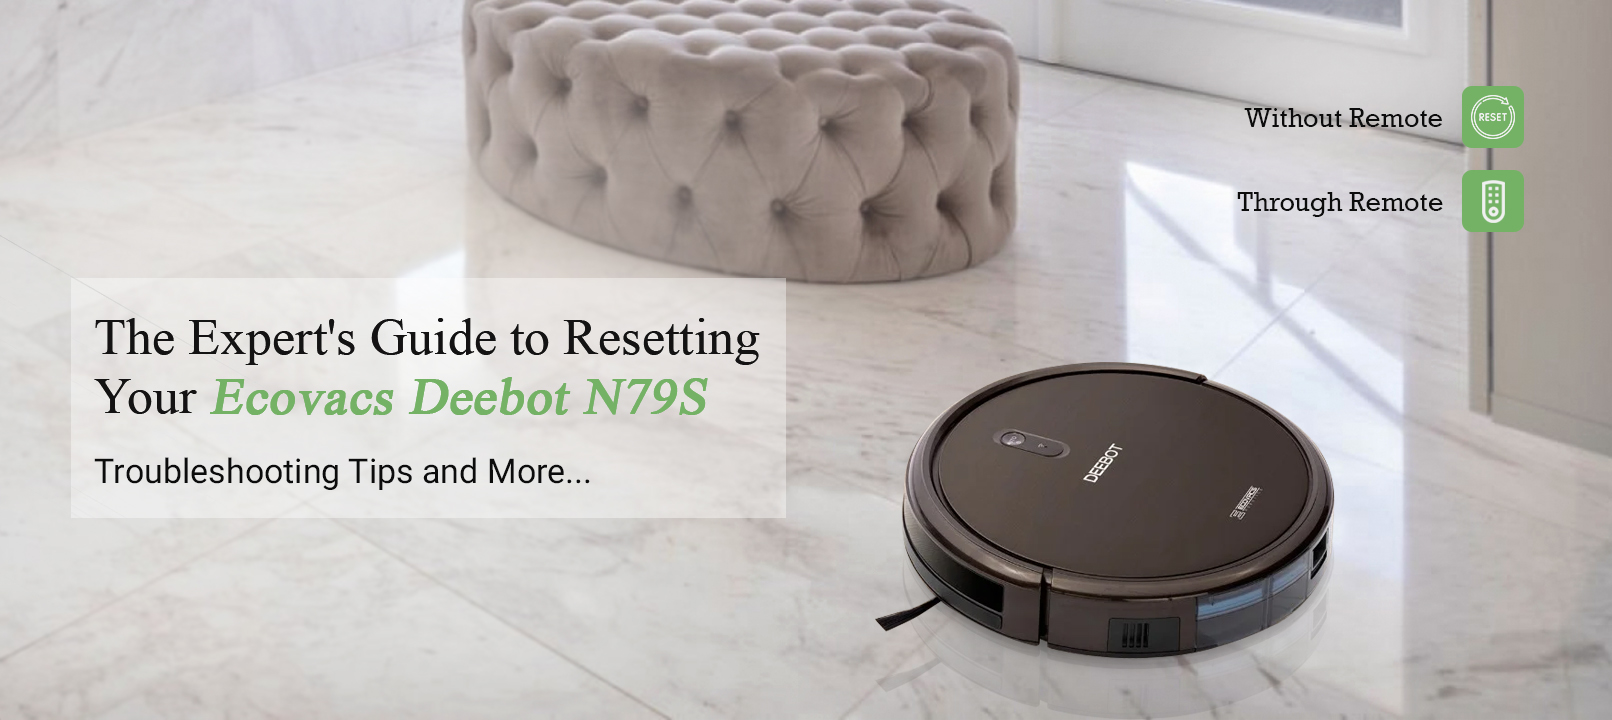 How to Reset Ecovacs Deebot N79S